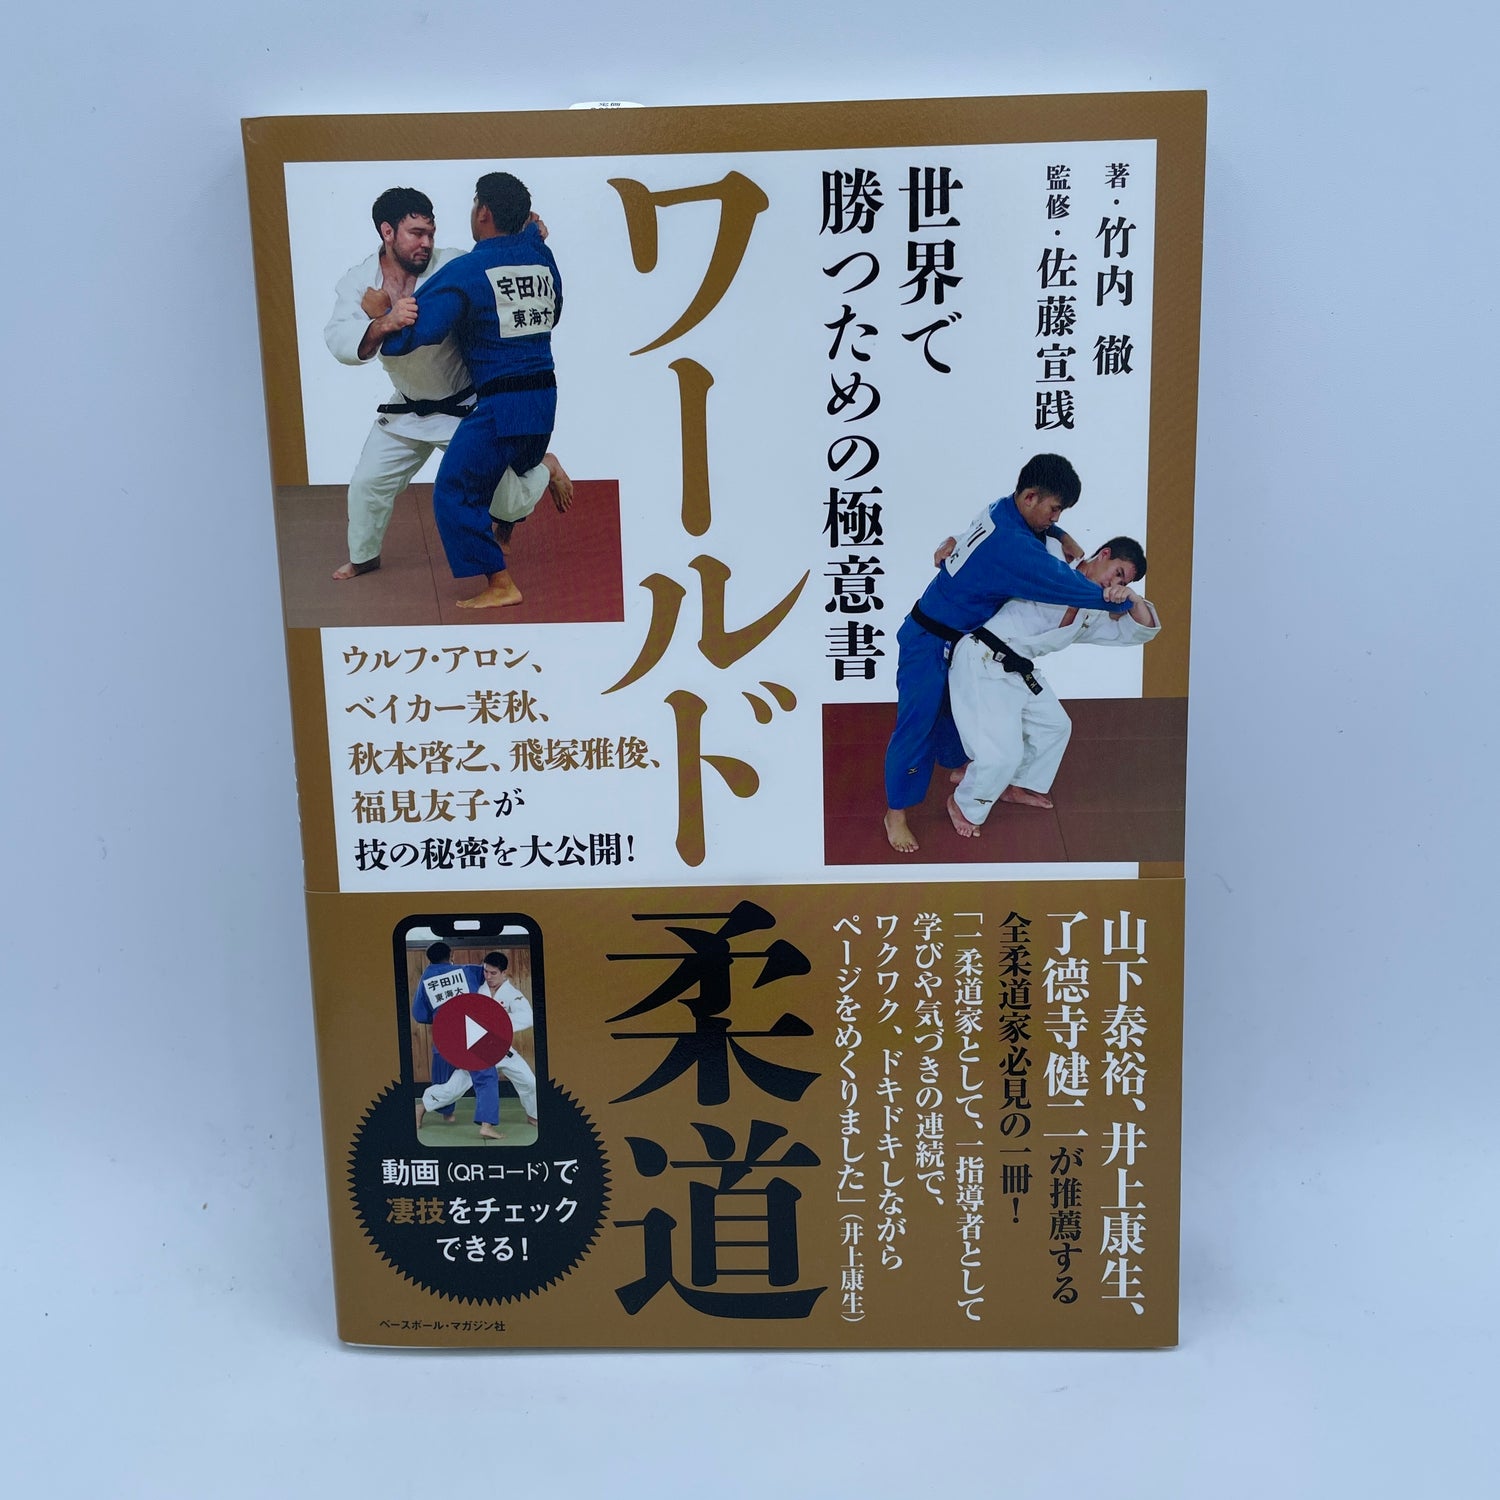 World Judo Secrets for Winning Book (with QR Codes)